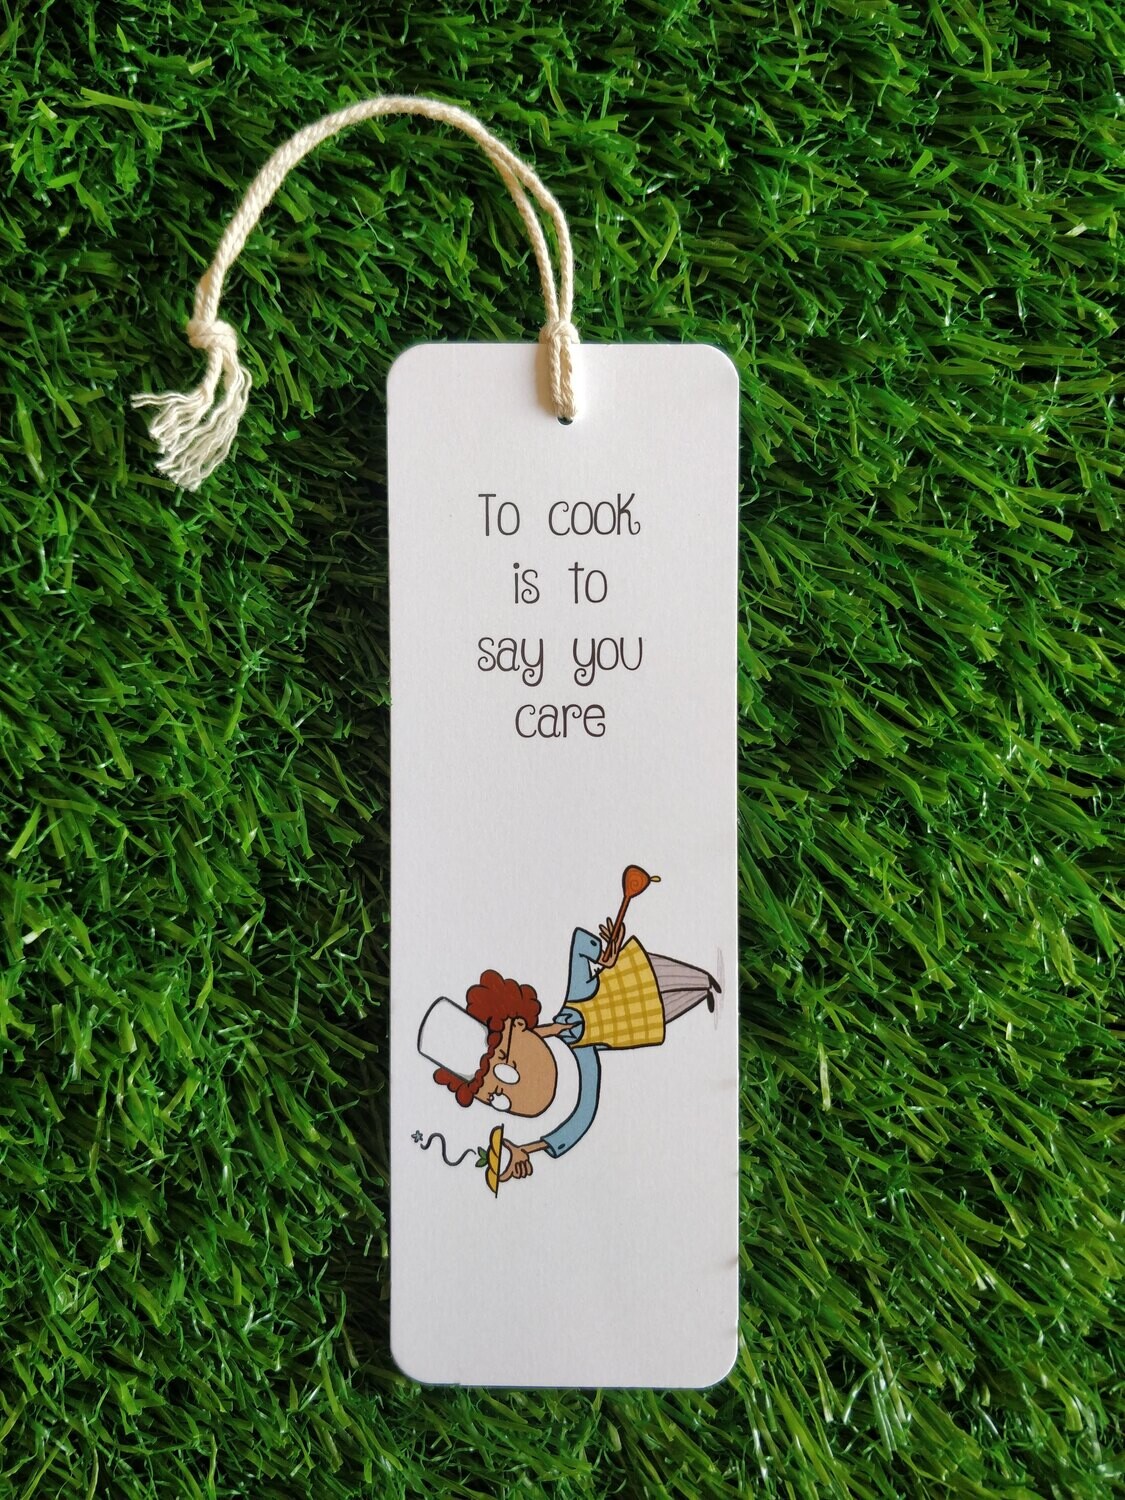 "To cook is to care" - BOOKMARK